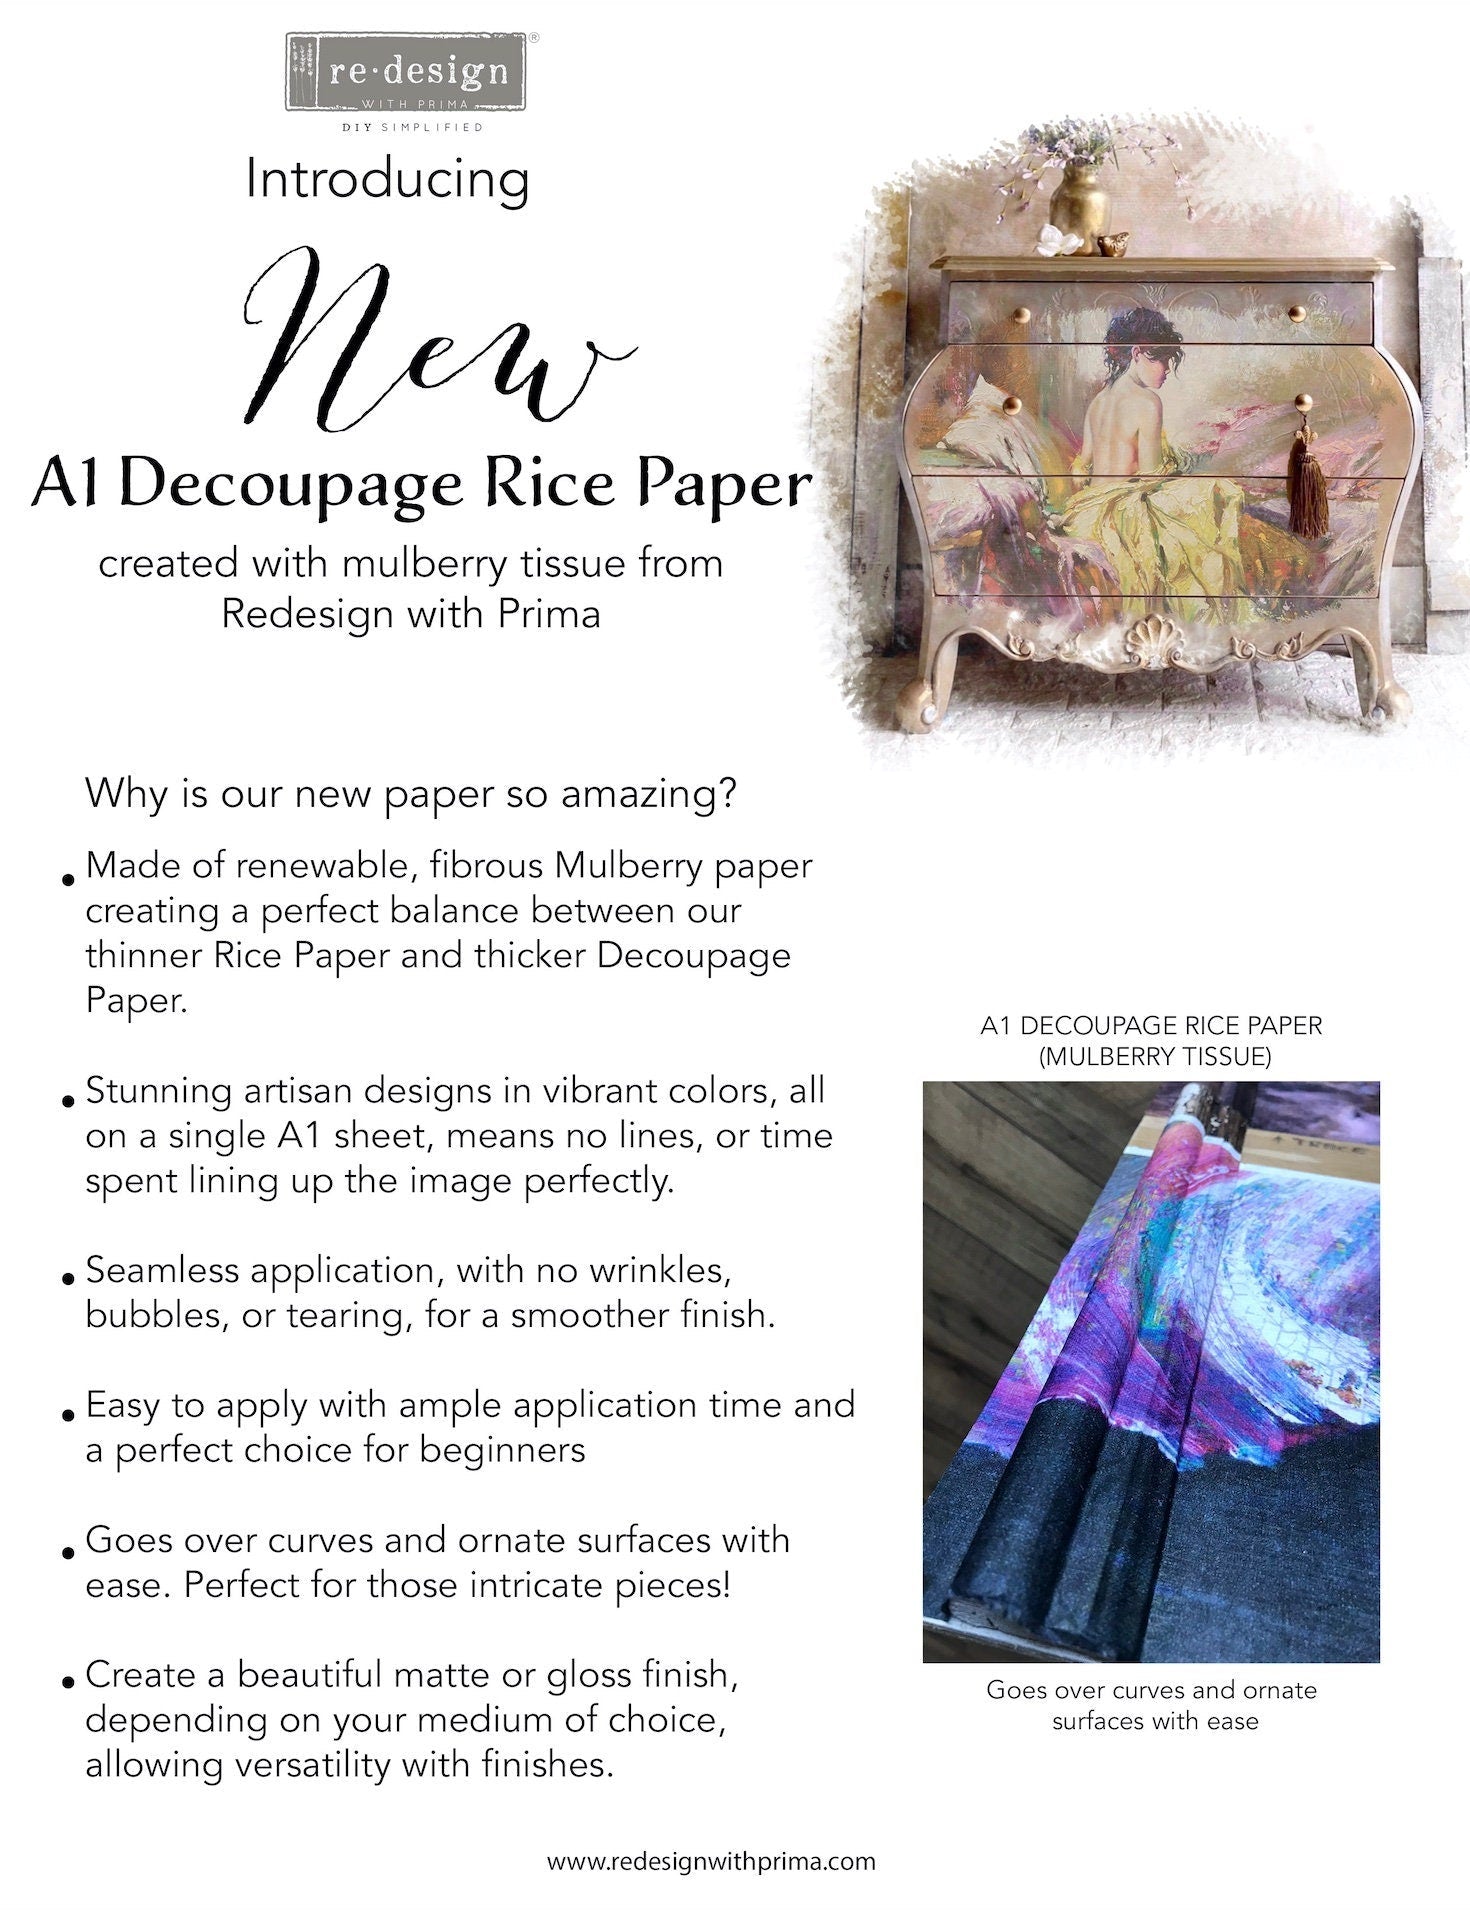 Peaceful A-1 Decoupage Paper by redesign with Prima 23.4"x33.1" - Same Day Shipping - Furniture Decoupage - Large Rice Paper Decoupage - belleandbeau850